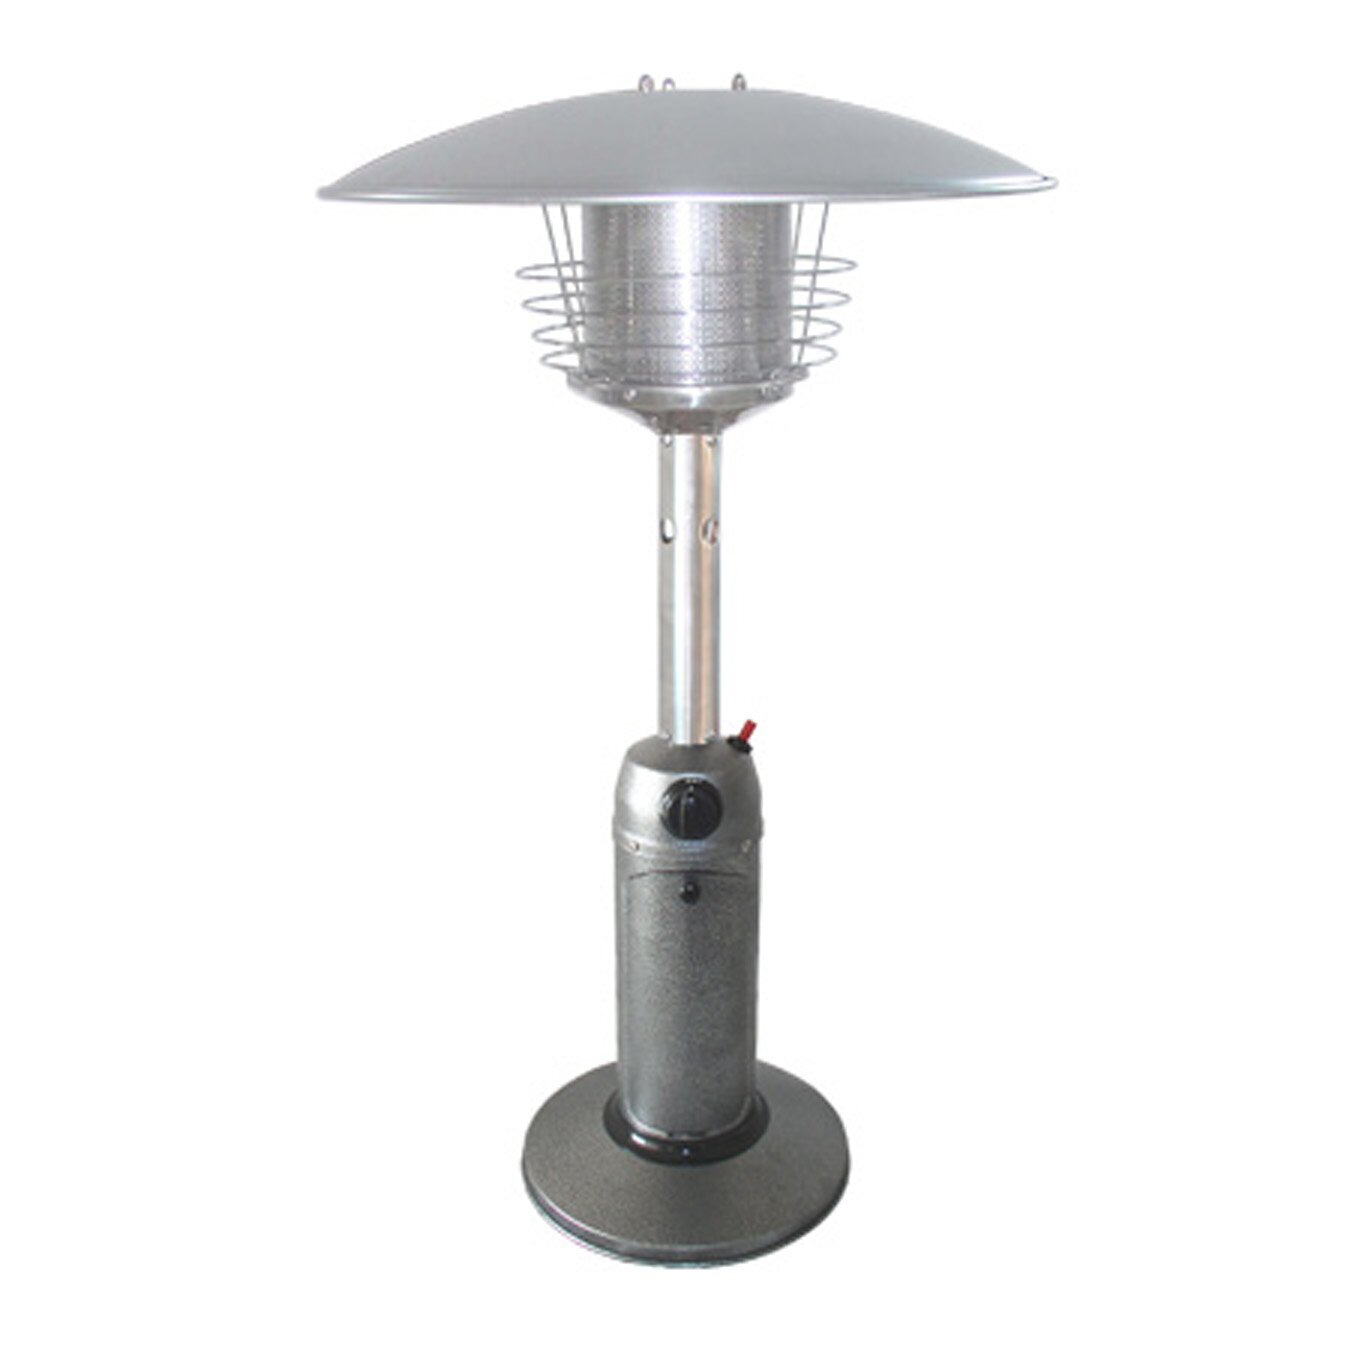 Patio Heaters Covers Patio Heaters Covers Pation Heater with regard to measurements 1350 X 1350